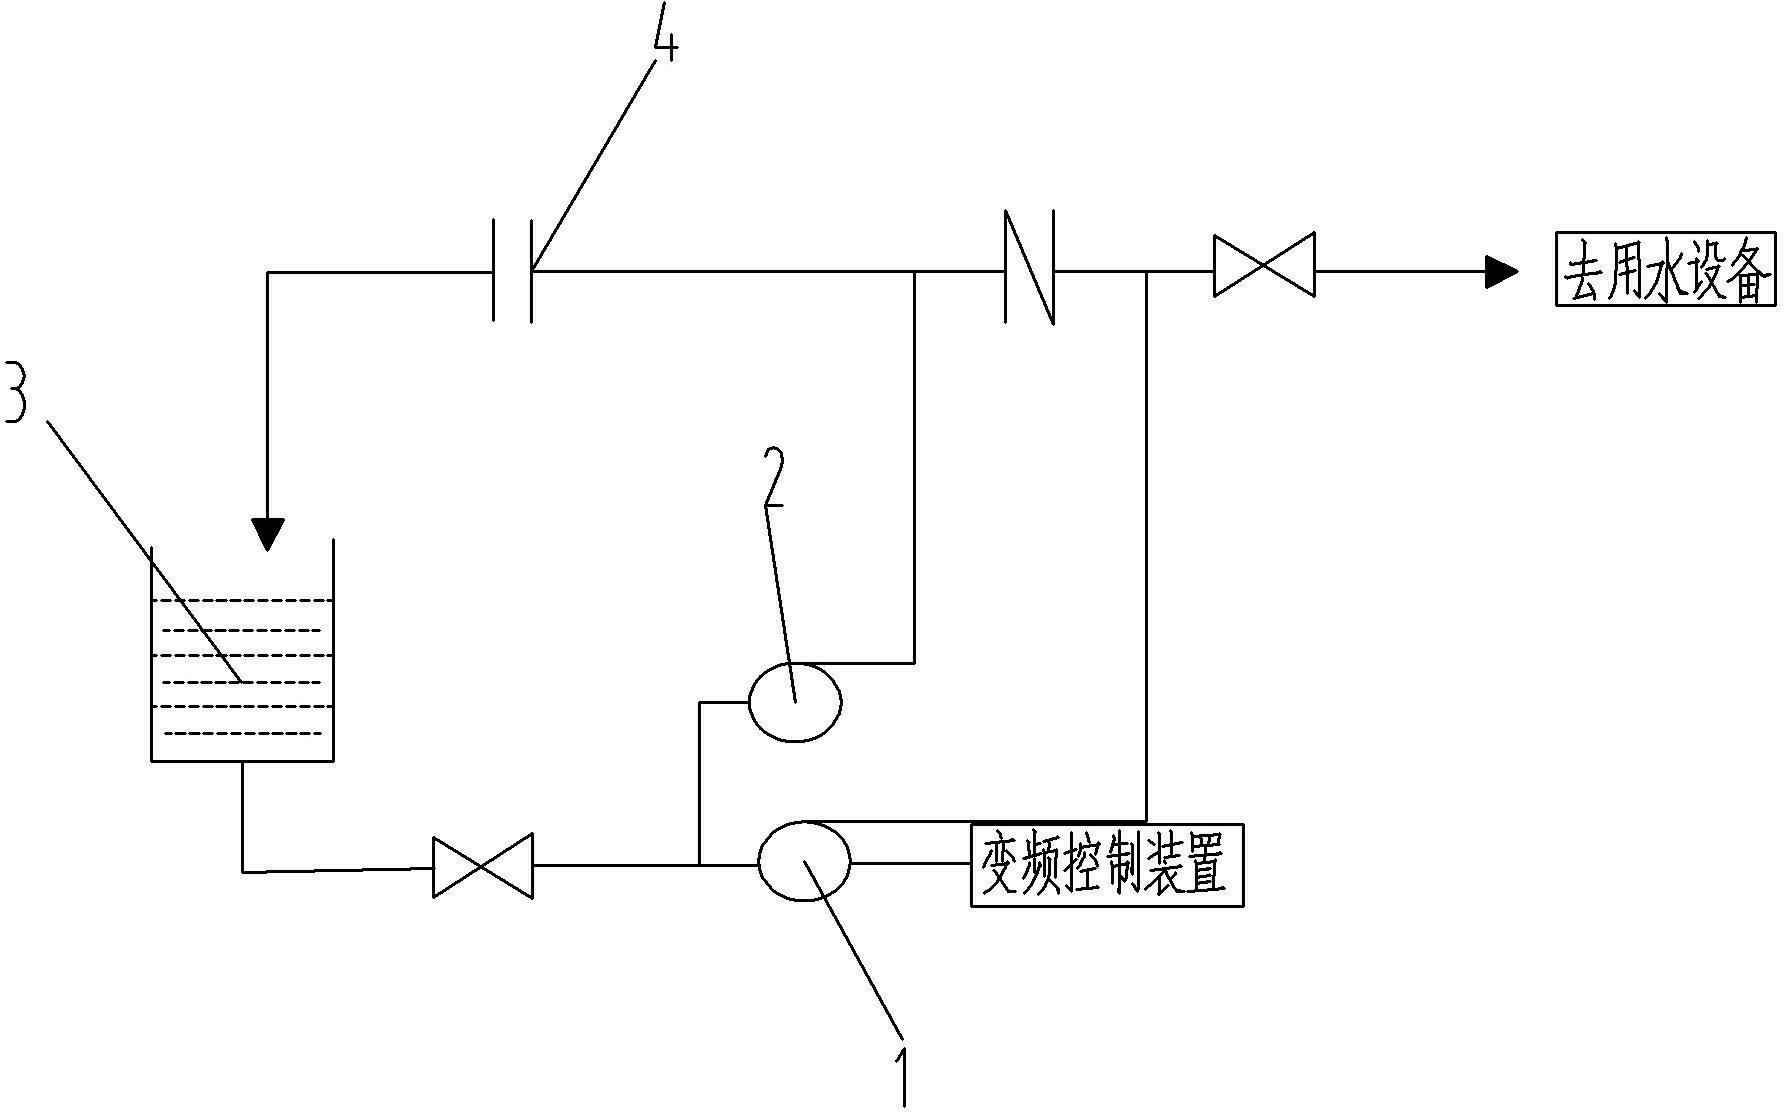 Underground variable-frequency constant-pressure water supply system